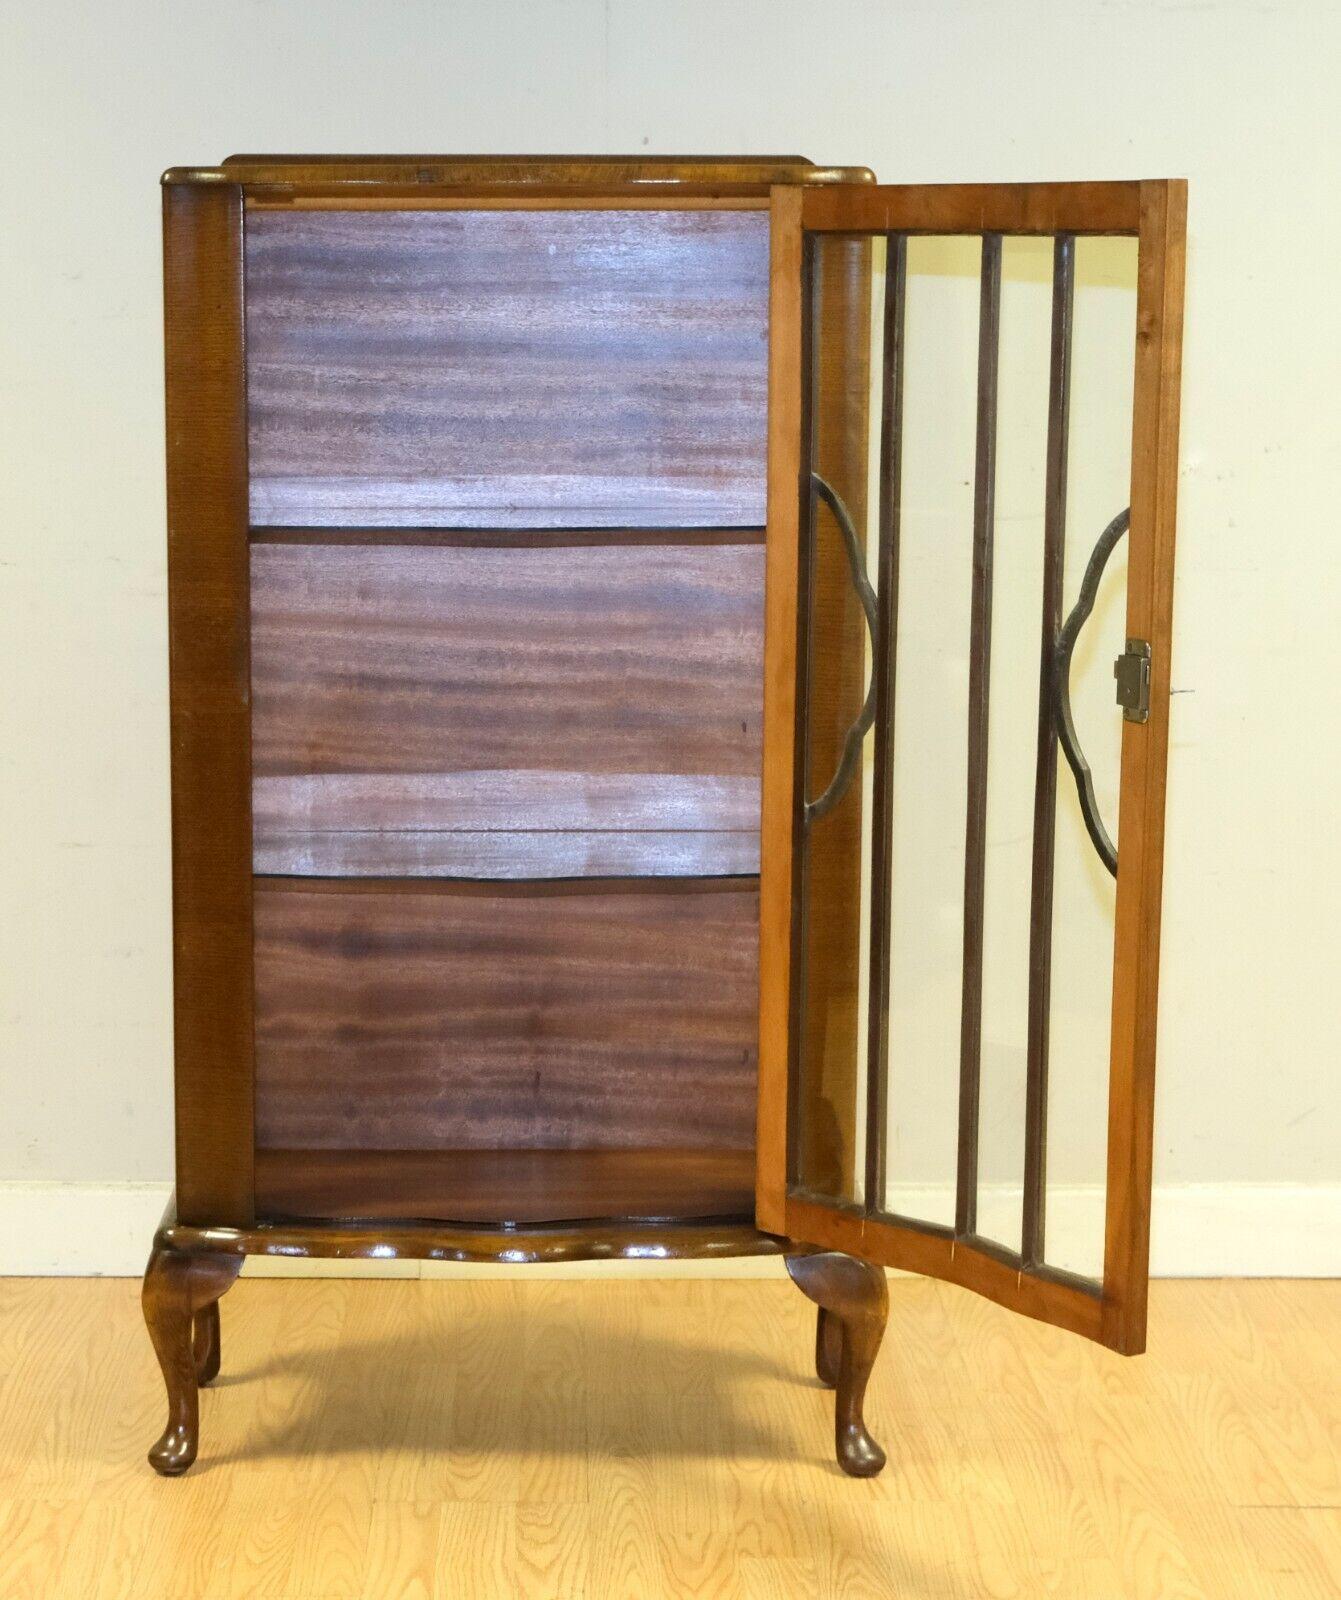 SMALL GORGEOUS WALNUT GLAZED BOOKCASE WiTH GLASS SHELVES ON QUEEN ANN Style LEGS (Glas) im Angebot